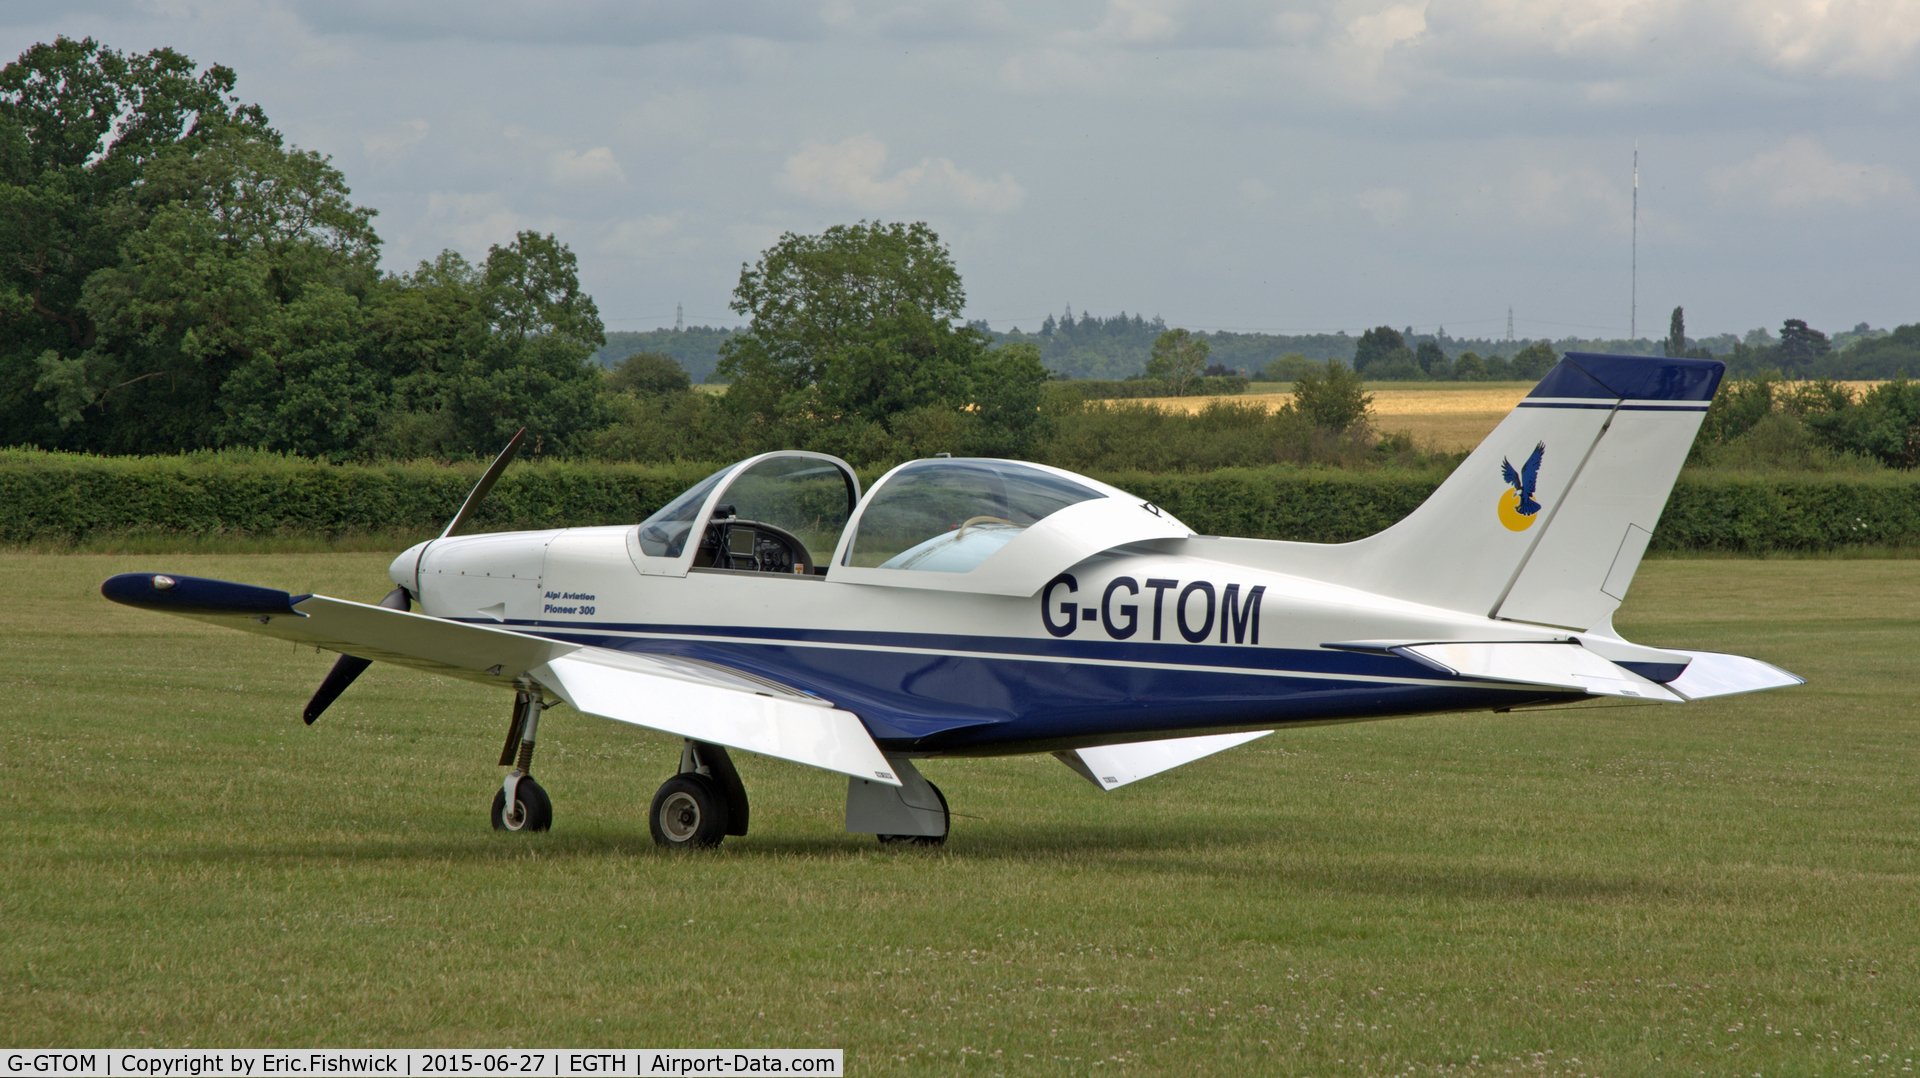 G-GTOM, 2008 Alpi Aviation Pioneer 300 C/N LAA 330-14795, 1. G-GTOM visiting The Shuttleworth Collection, Old warden.